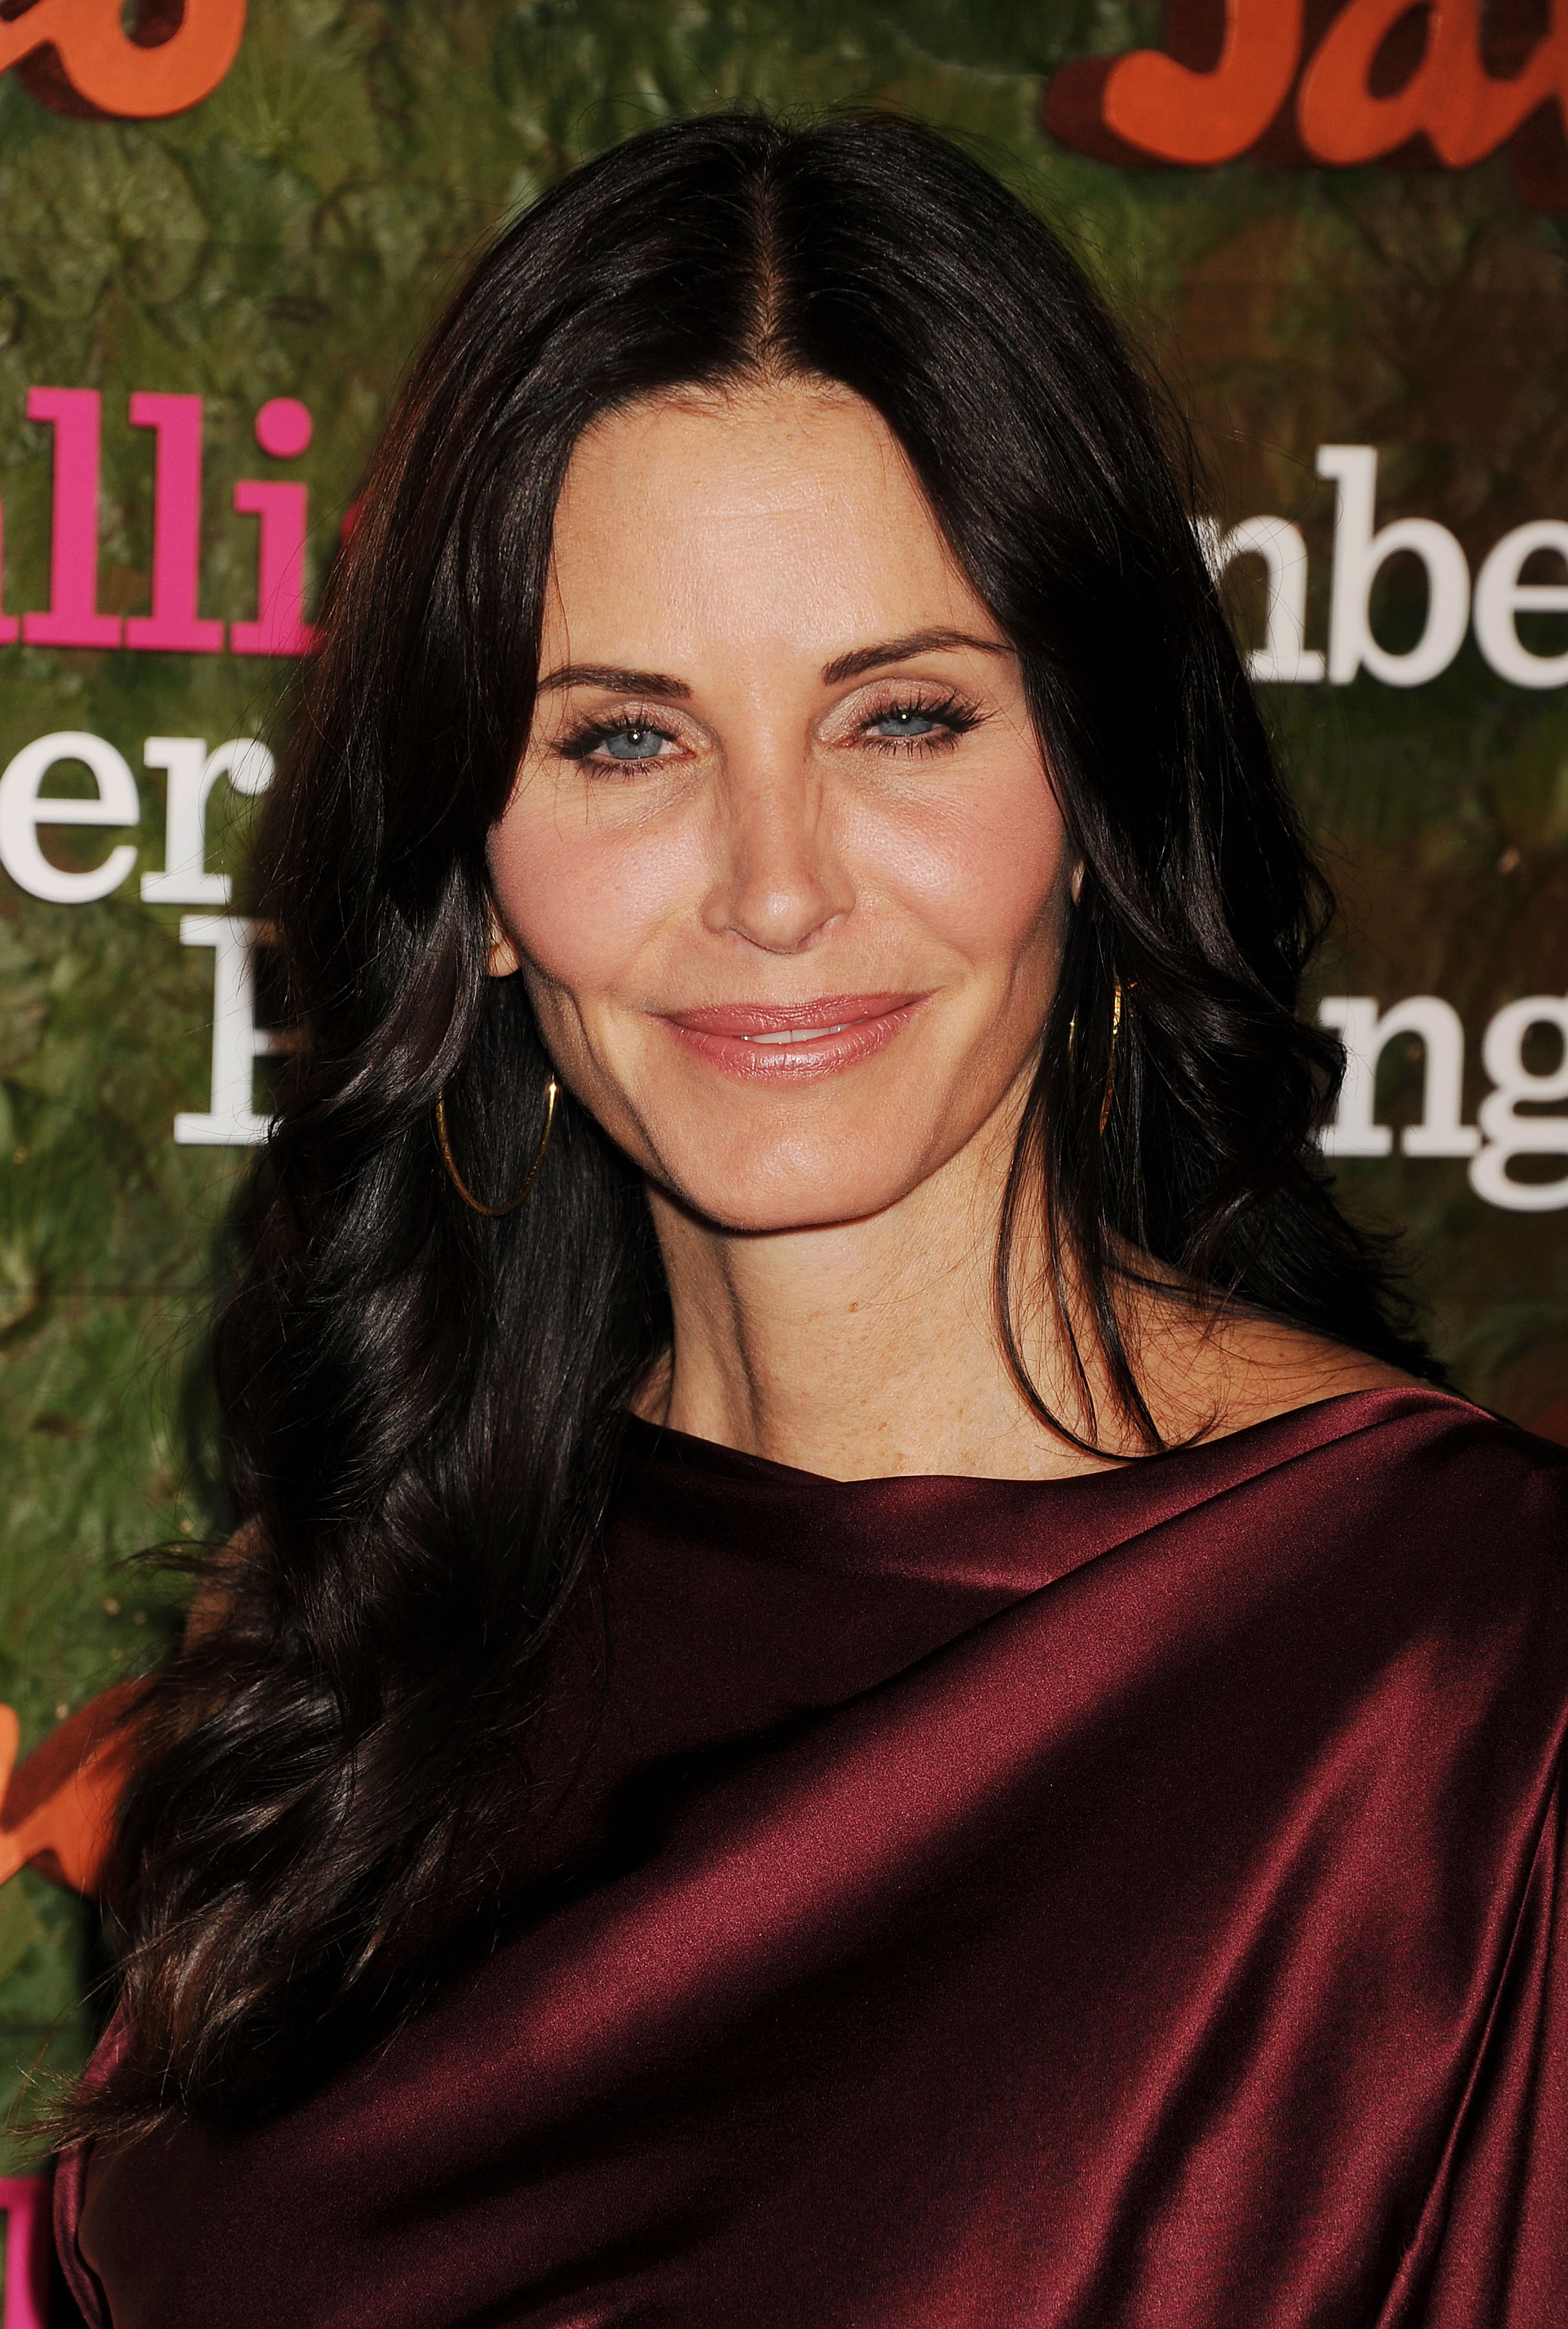 Courtney Cox arrives at the Wallis Annenberg Center For The Performing Arts Inaugural Gala at Wallis Annenberg Center for the Performing Arts in Beverly Hills, California on October 17, 2013. | Source: Getty Images